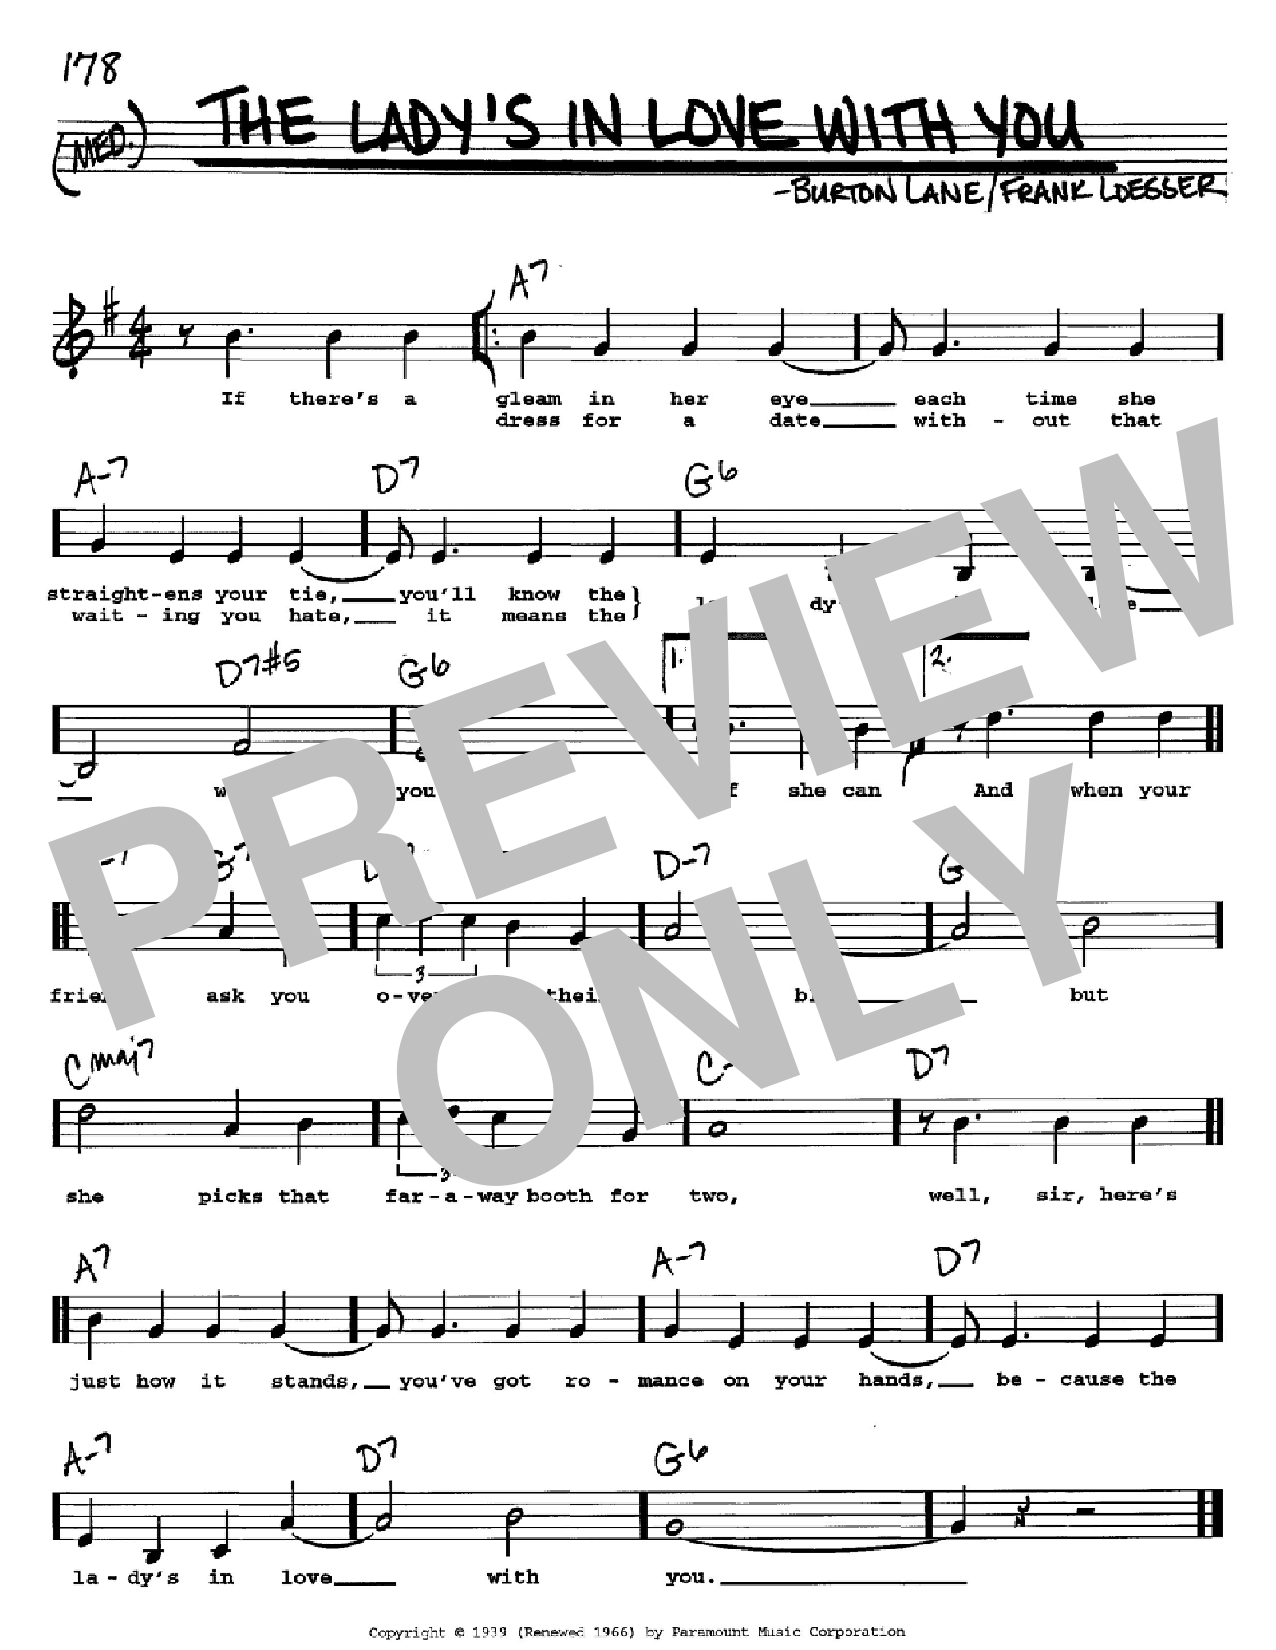 Download Benny Goodman The Lady's In Love With You Sheet Music